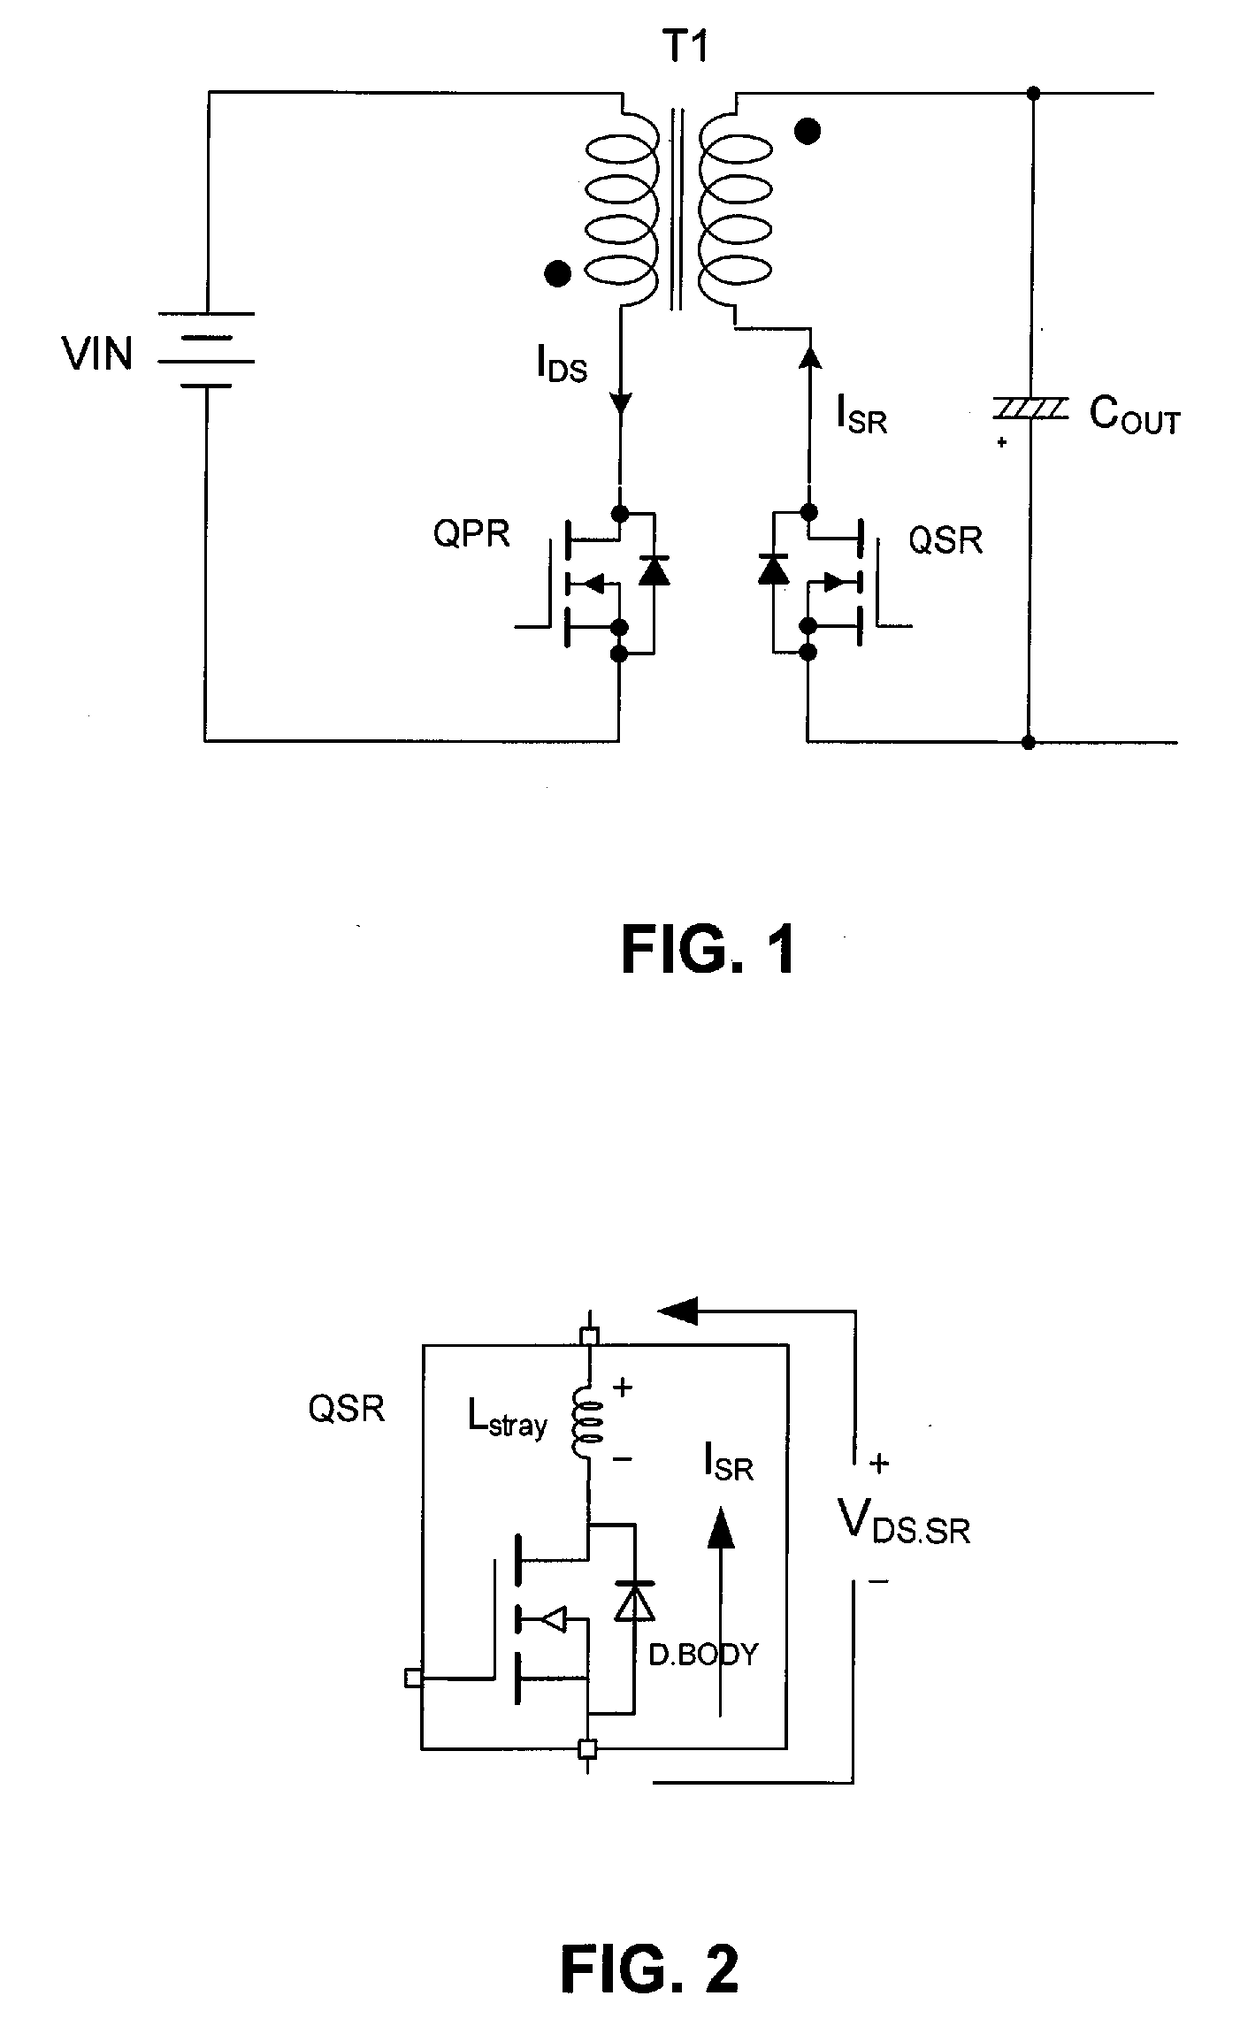 Self-tuning adaptive dead time control for continuous conduction mode and discontinuous conduction mode operation of a flyback converter